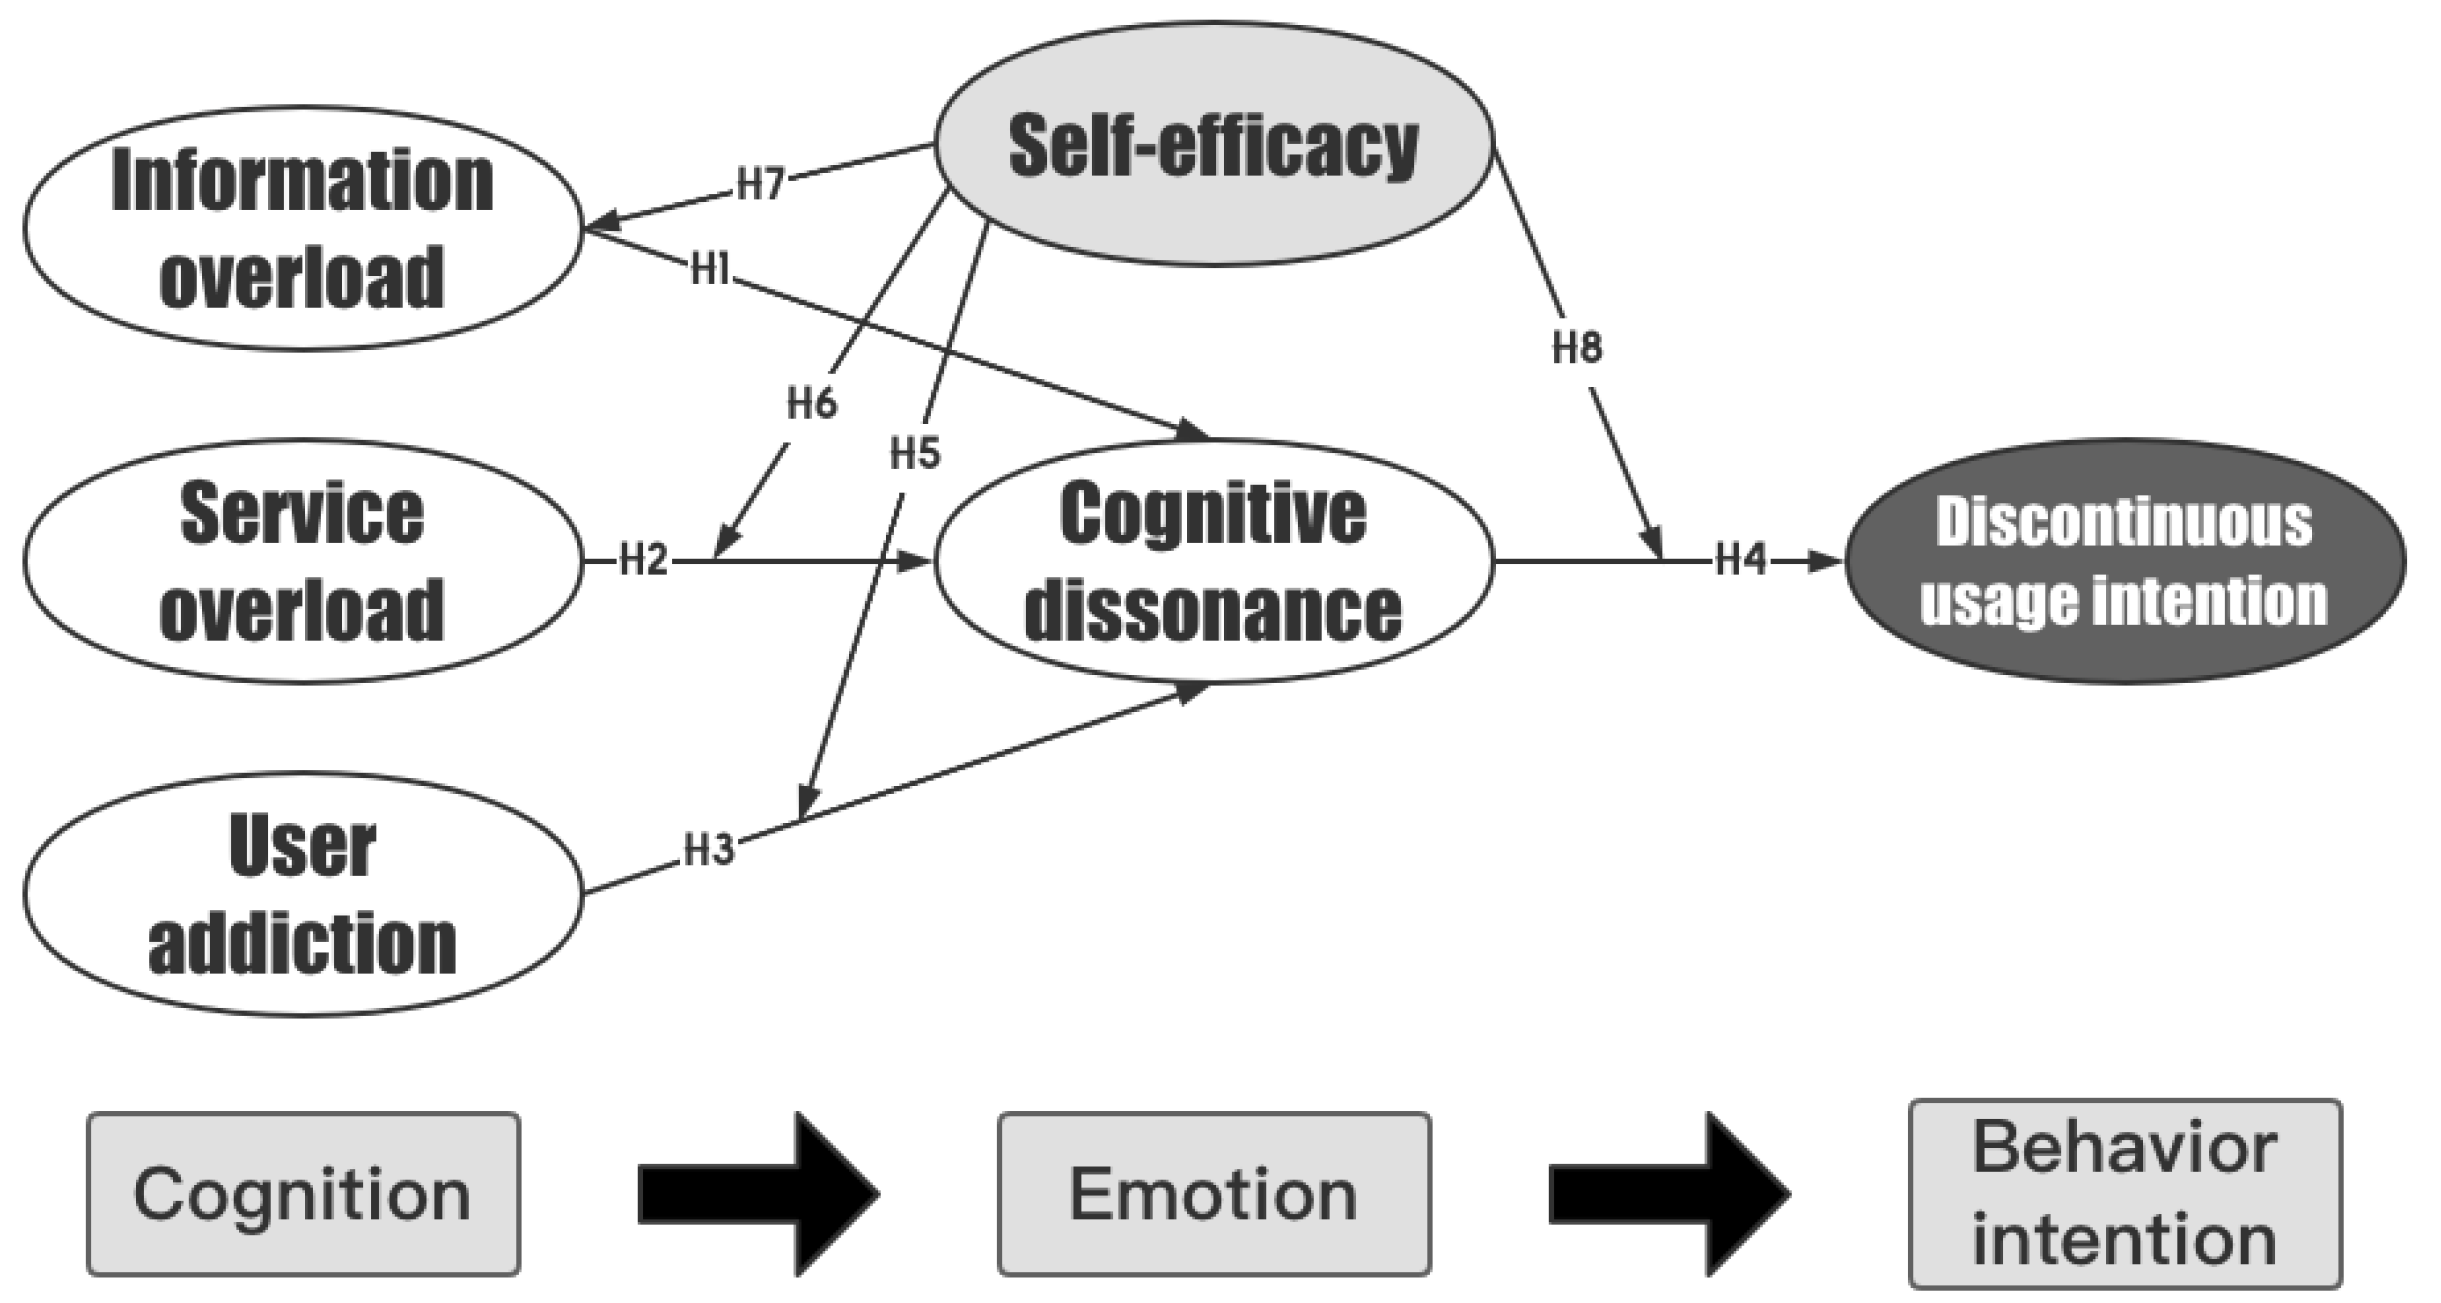 Behavioral Sciences Free Full-Text Mind over Matter Examining the Role of Cognitive Dissonance and Self-Efficacy in Discontinuous Usage Intentions on Pan-Entertainment Mobile Live Broadcast Platforms pic